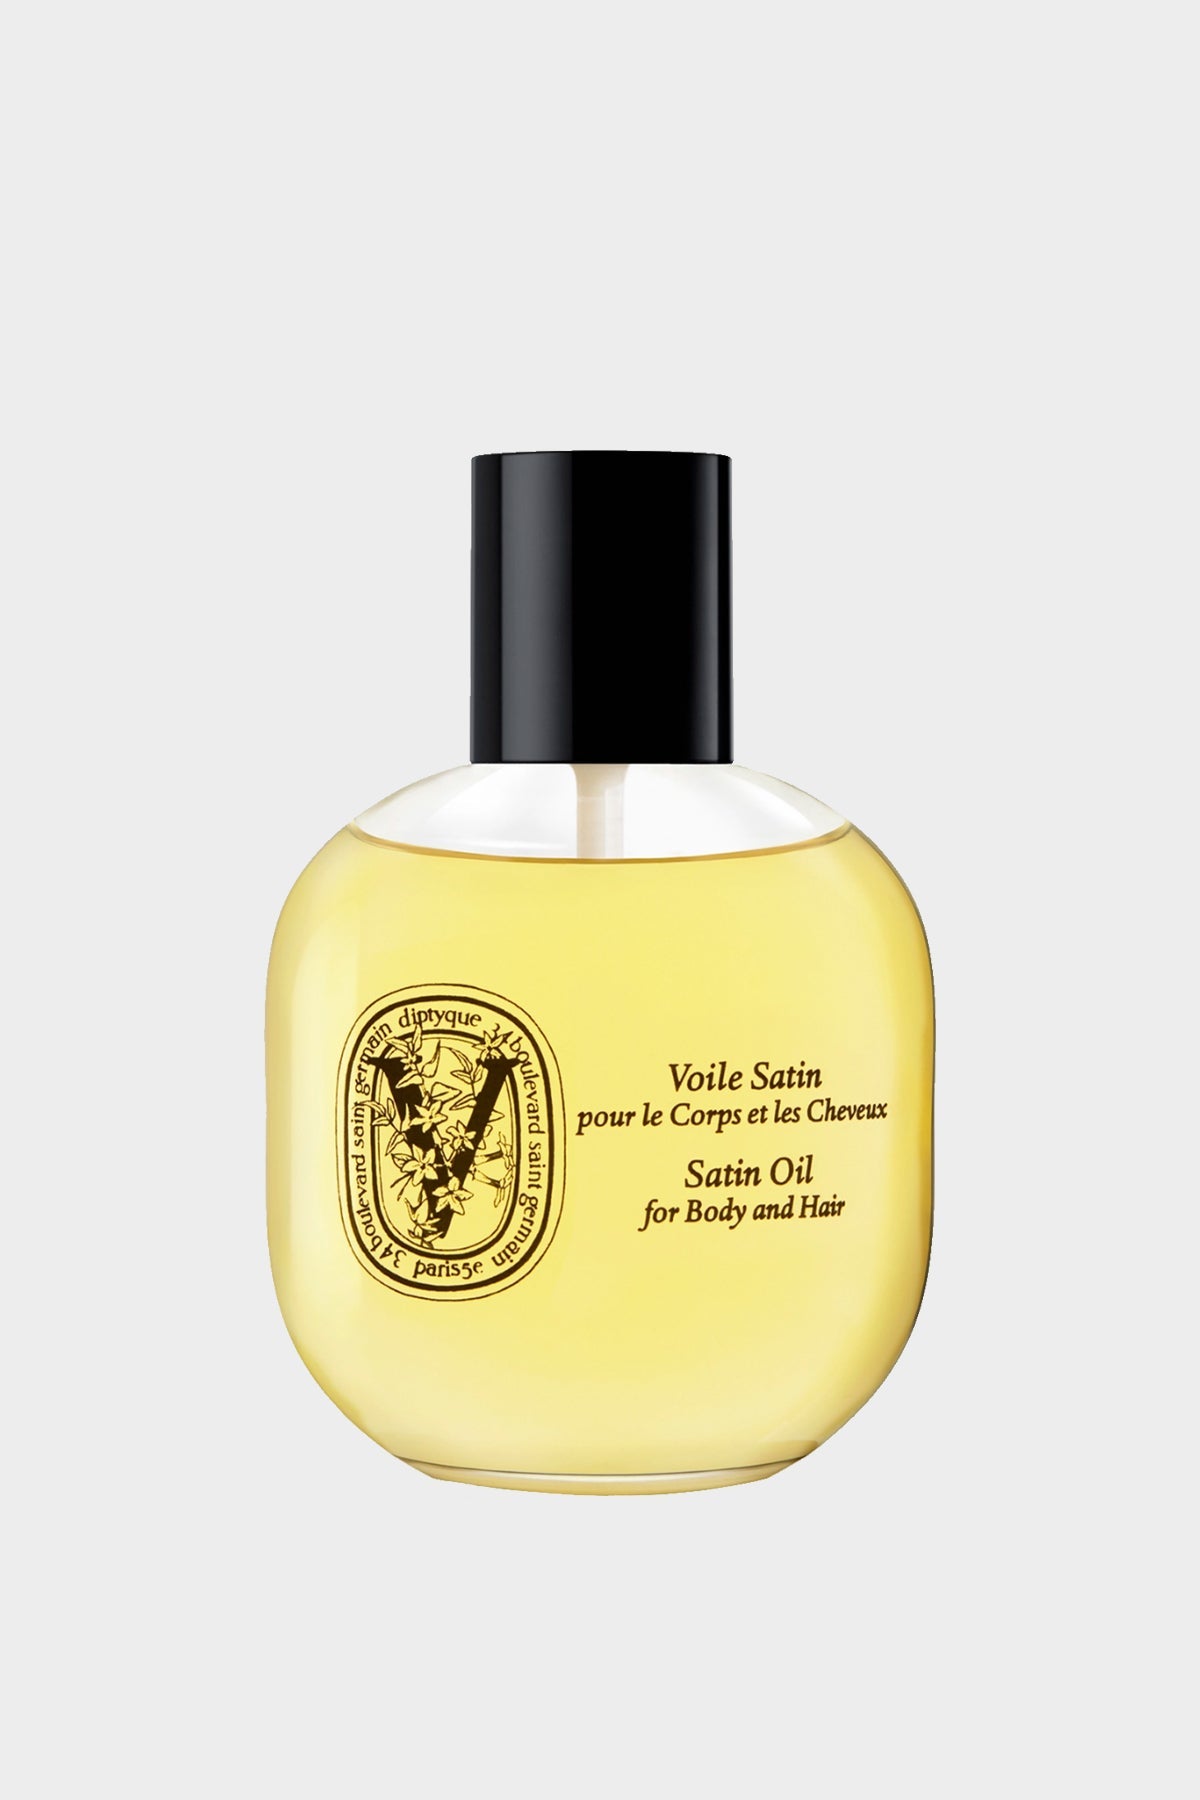 Satin Oil for Body and Hair - shop-olivia.com